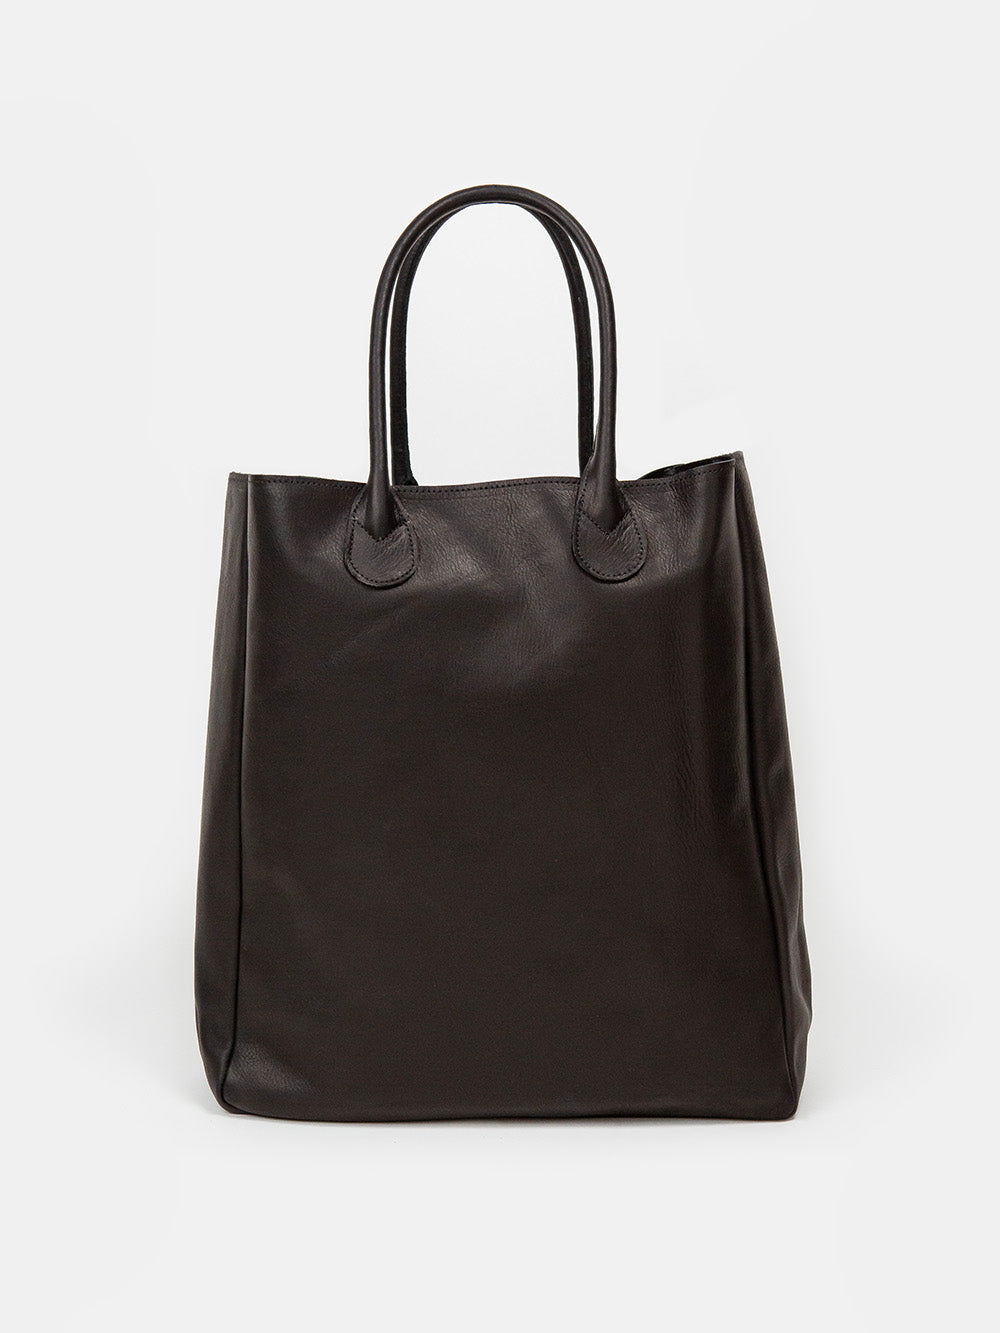 Erica Tanov | Eve Cowhide Leather Tote - Black